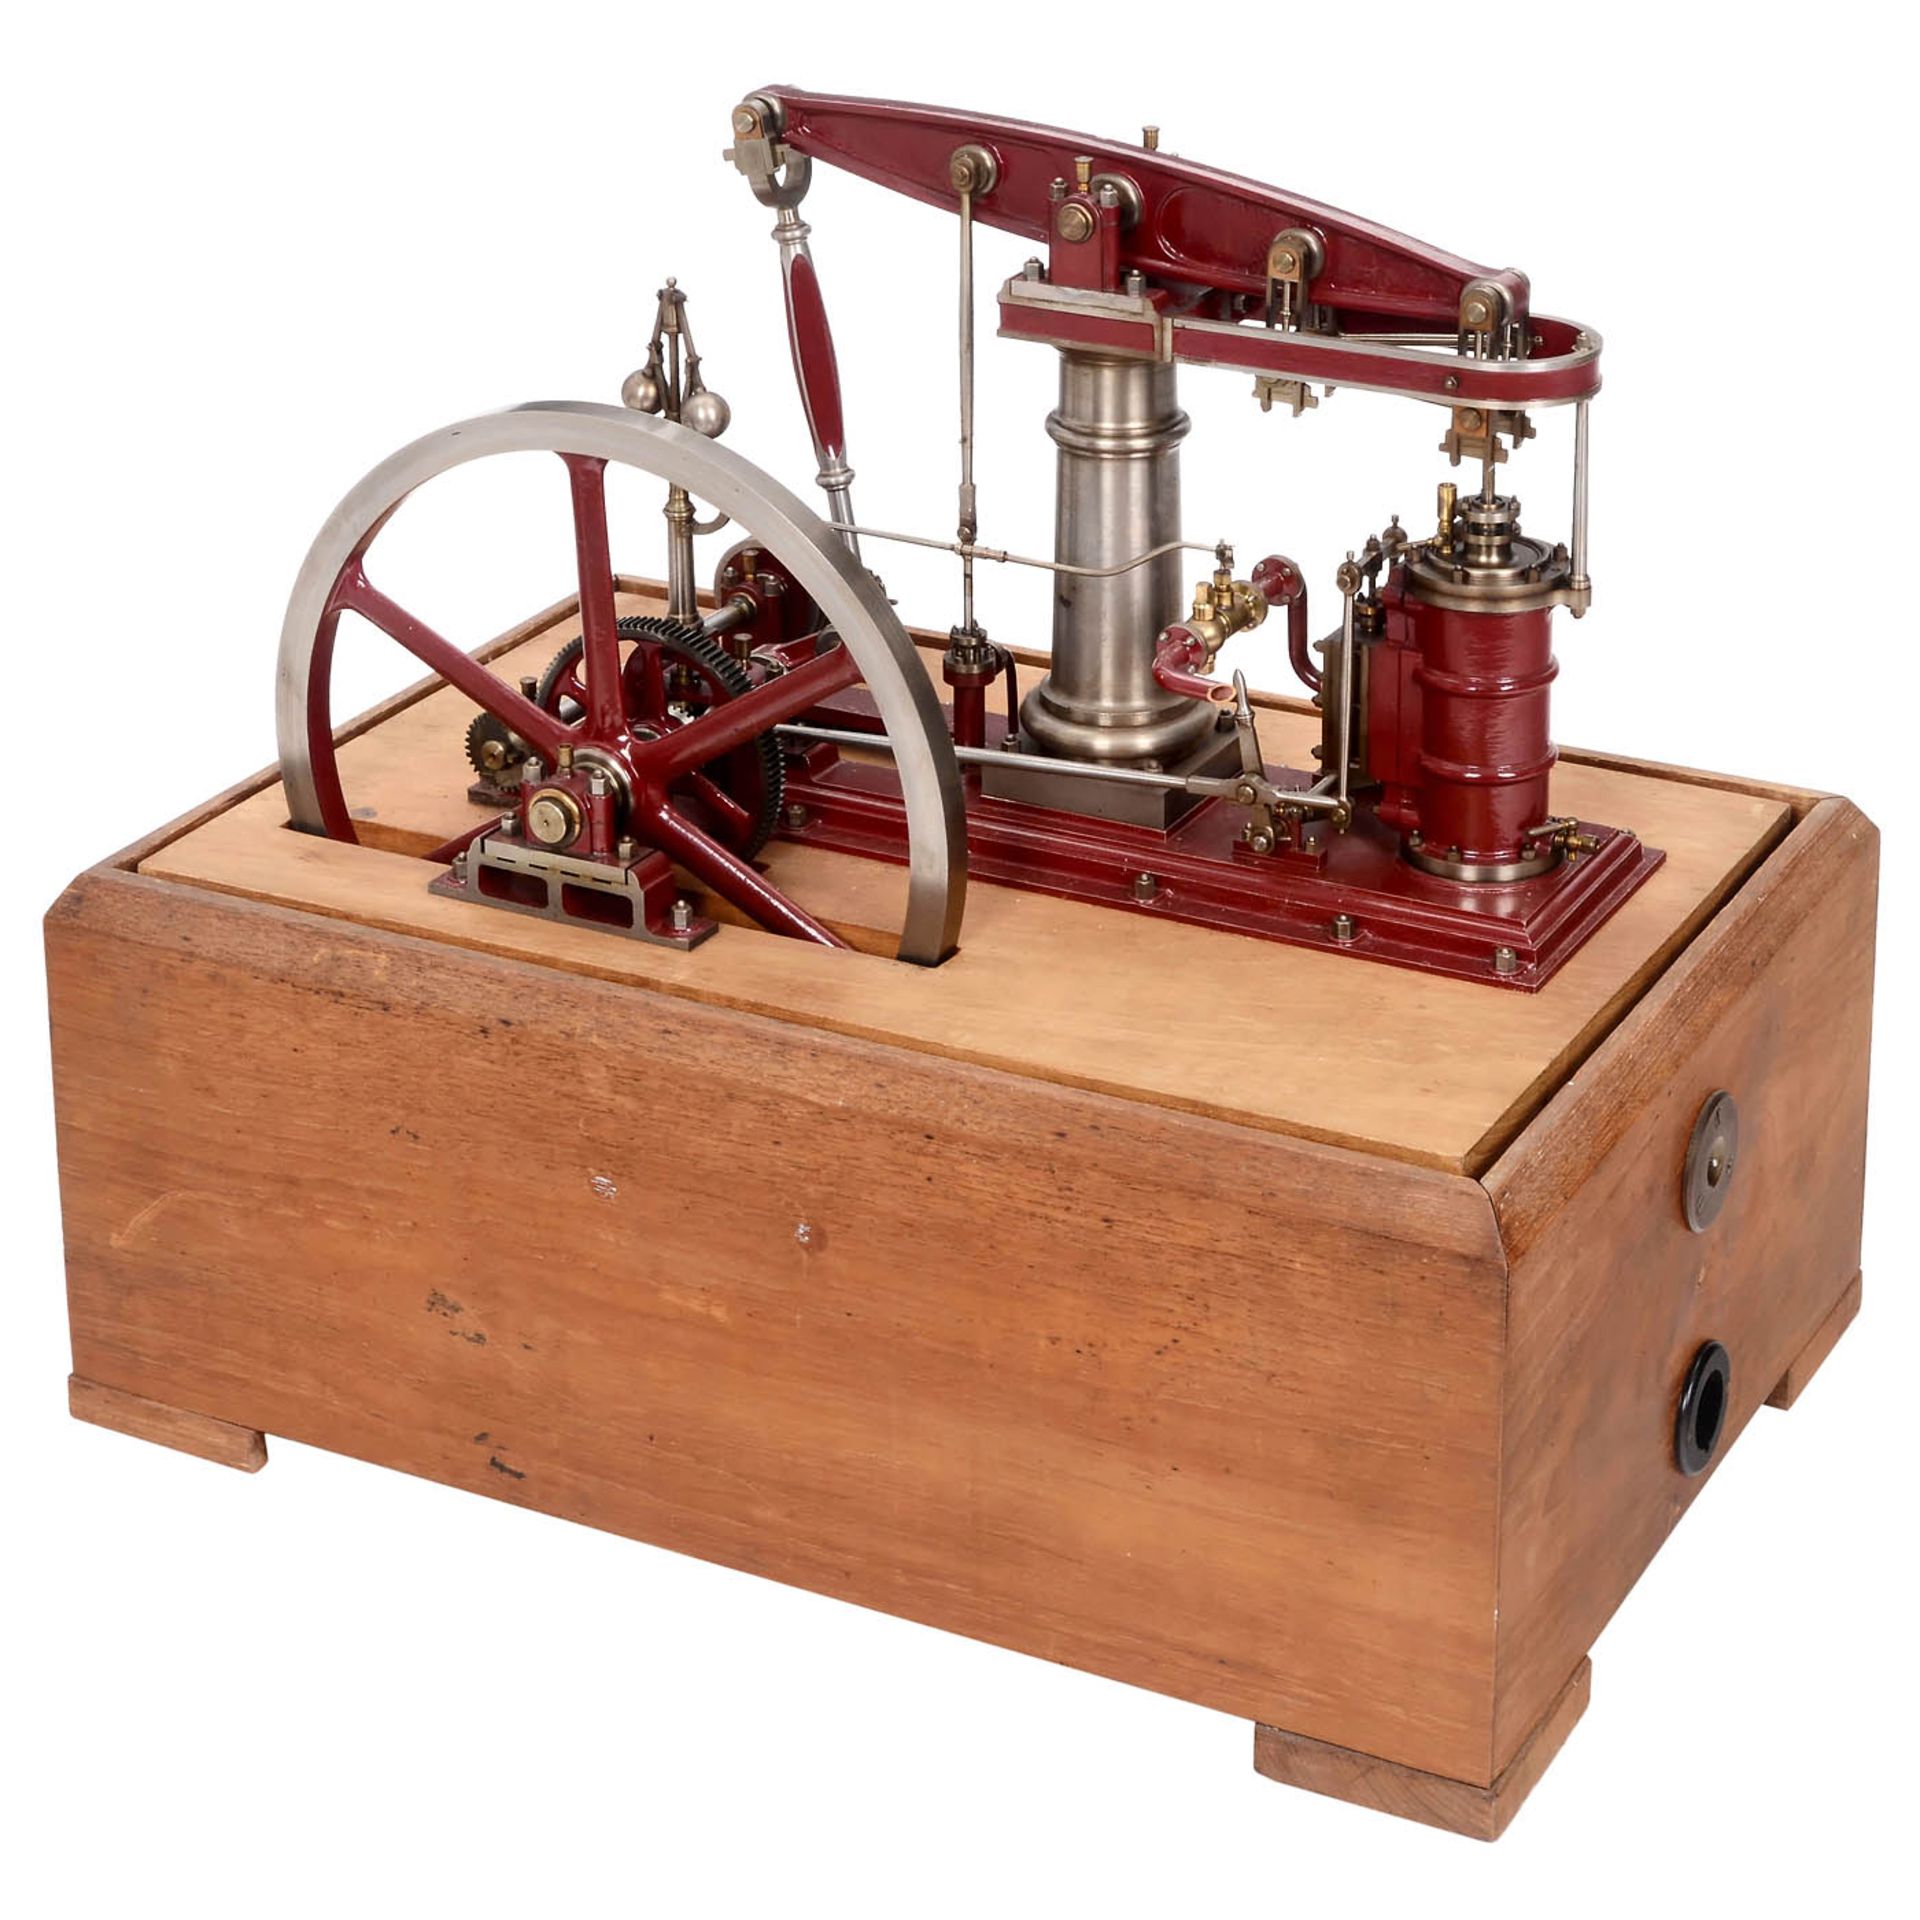 Electric Model of a Walking Beam Steam Engine, c. 1970 - Image 2 of 3